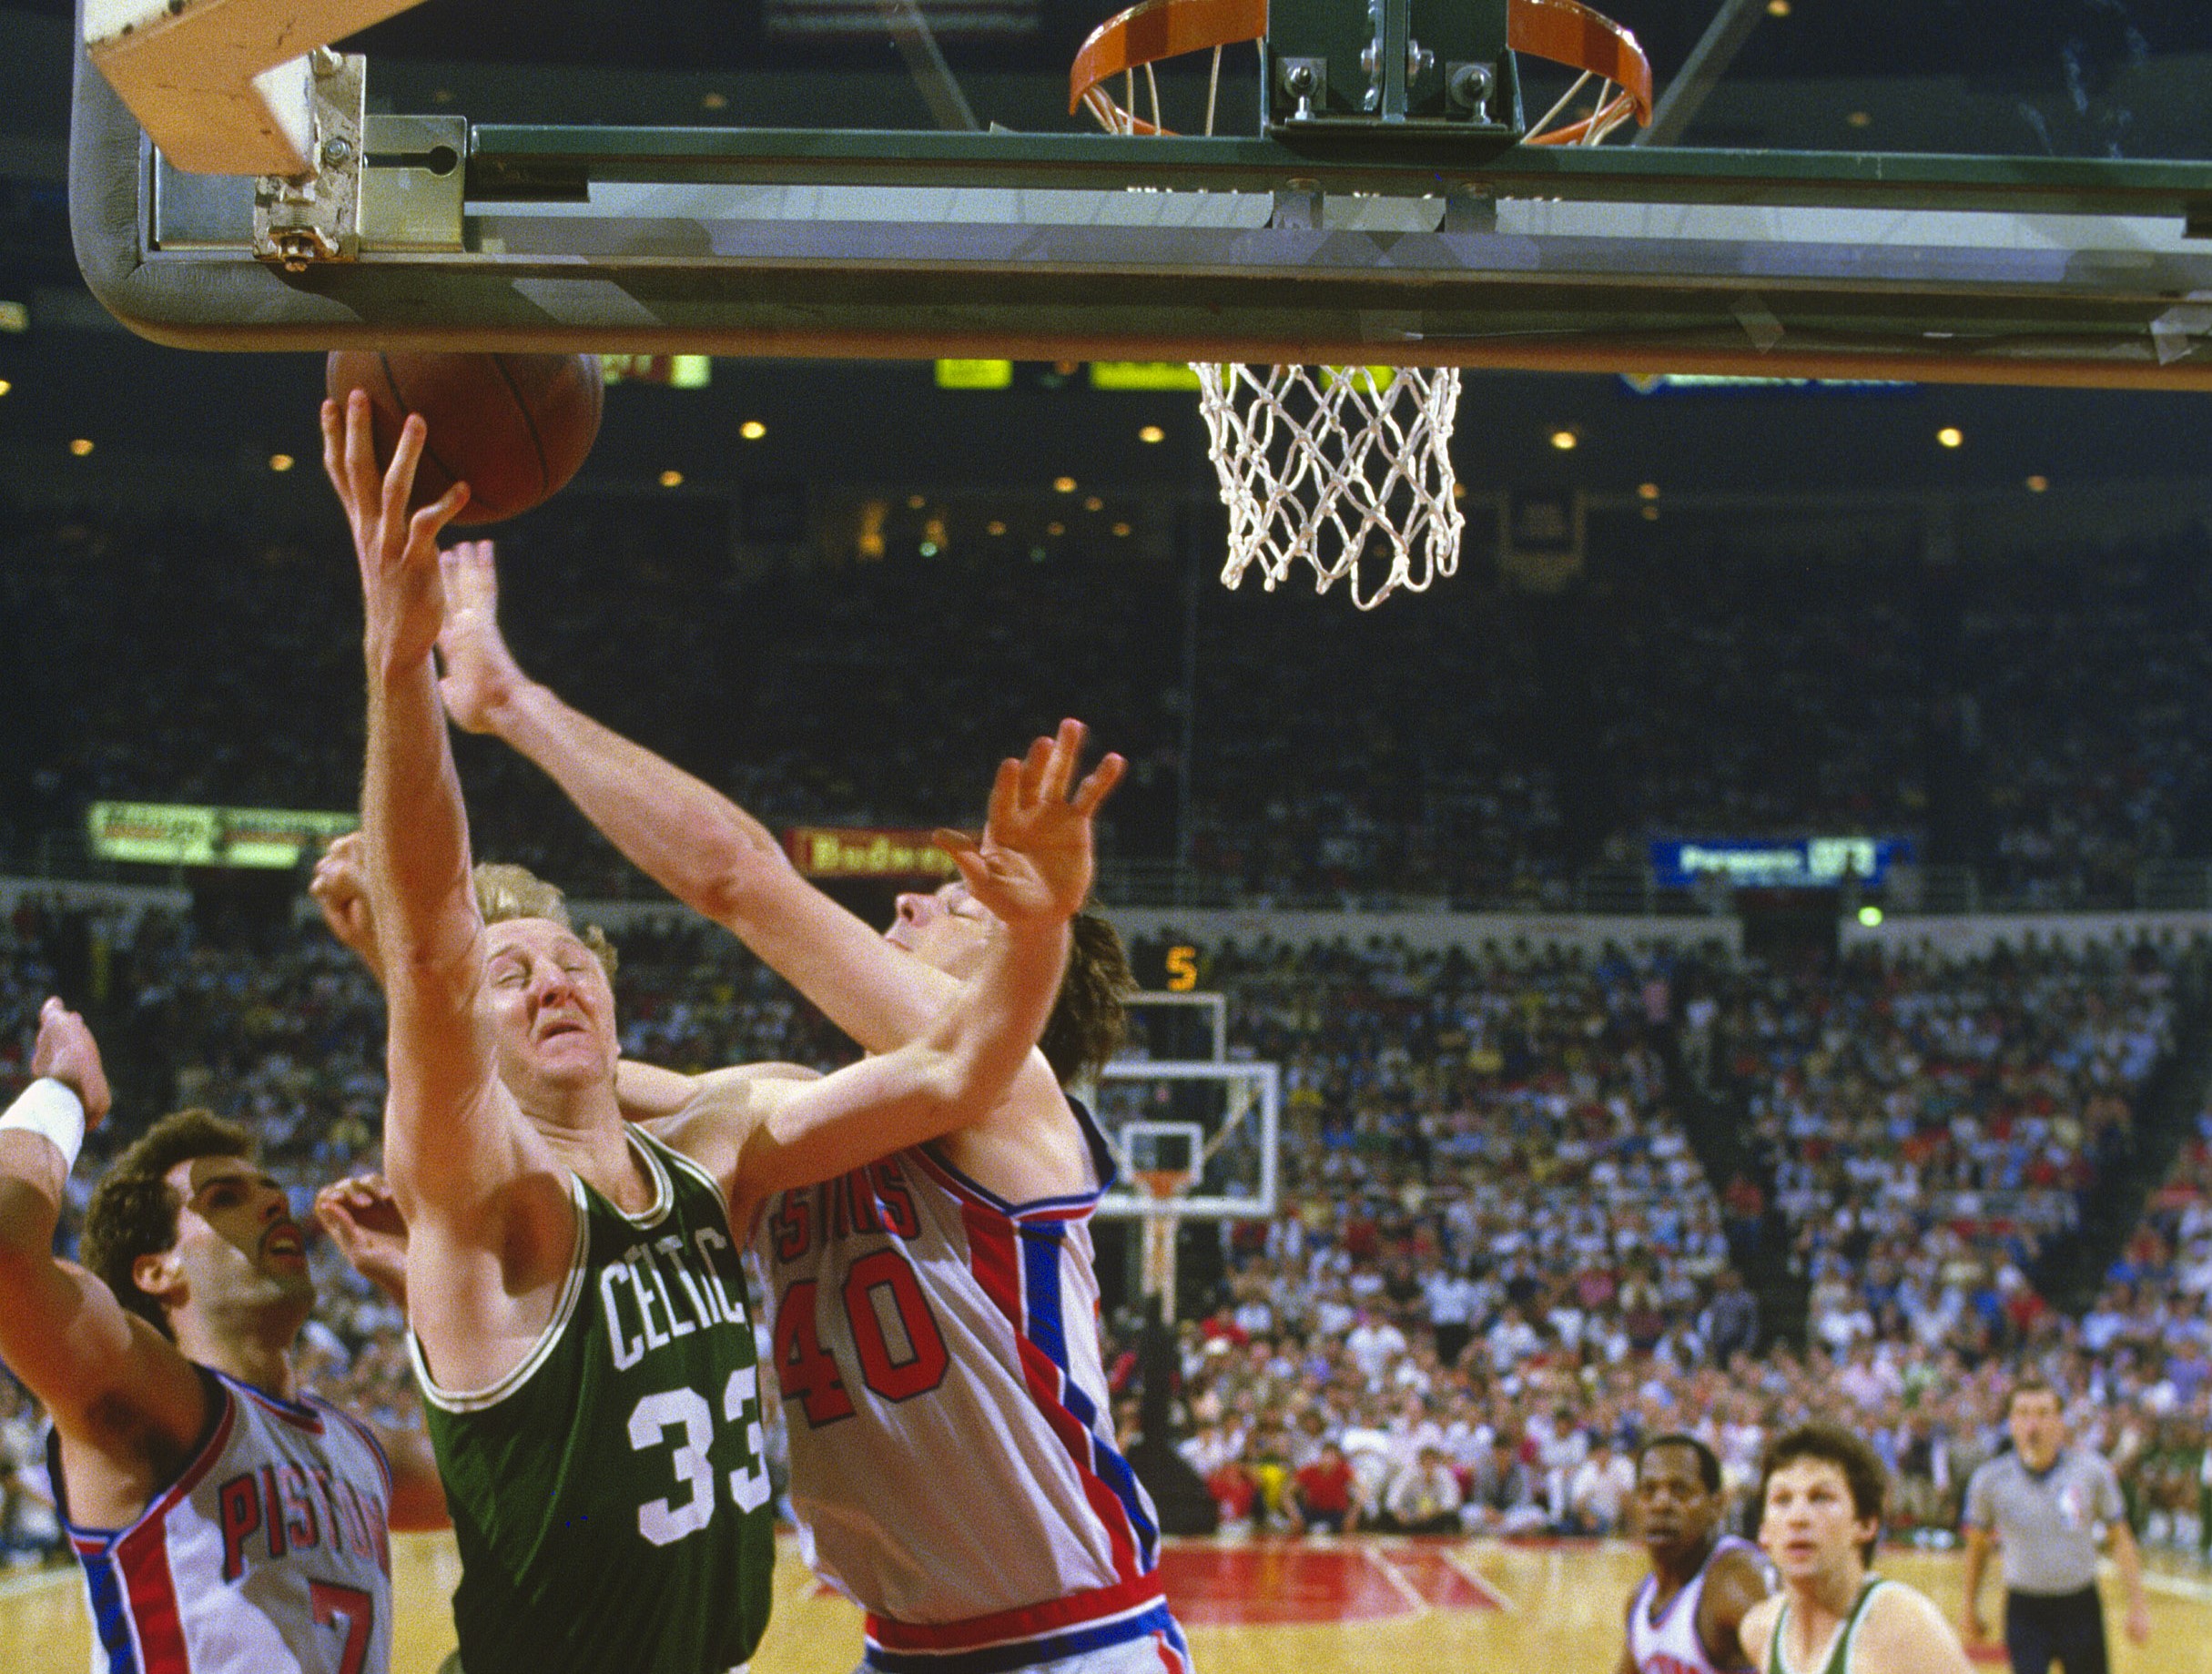 Larry Bird of the Boston Celtics shoots over Kelly Tripucka and Bill Laimbeer of the Detroit Pistons.